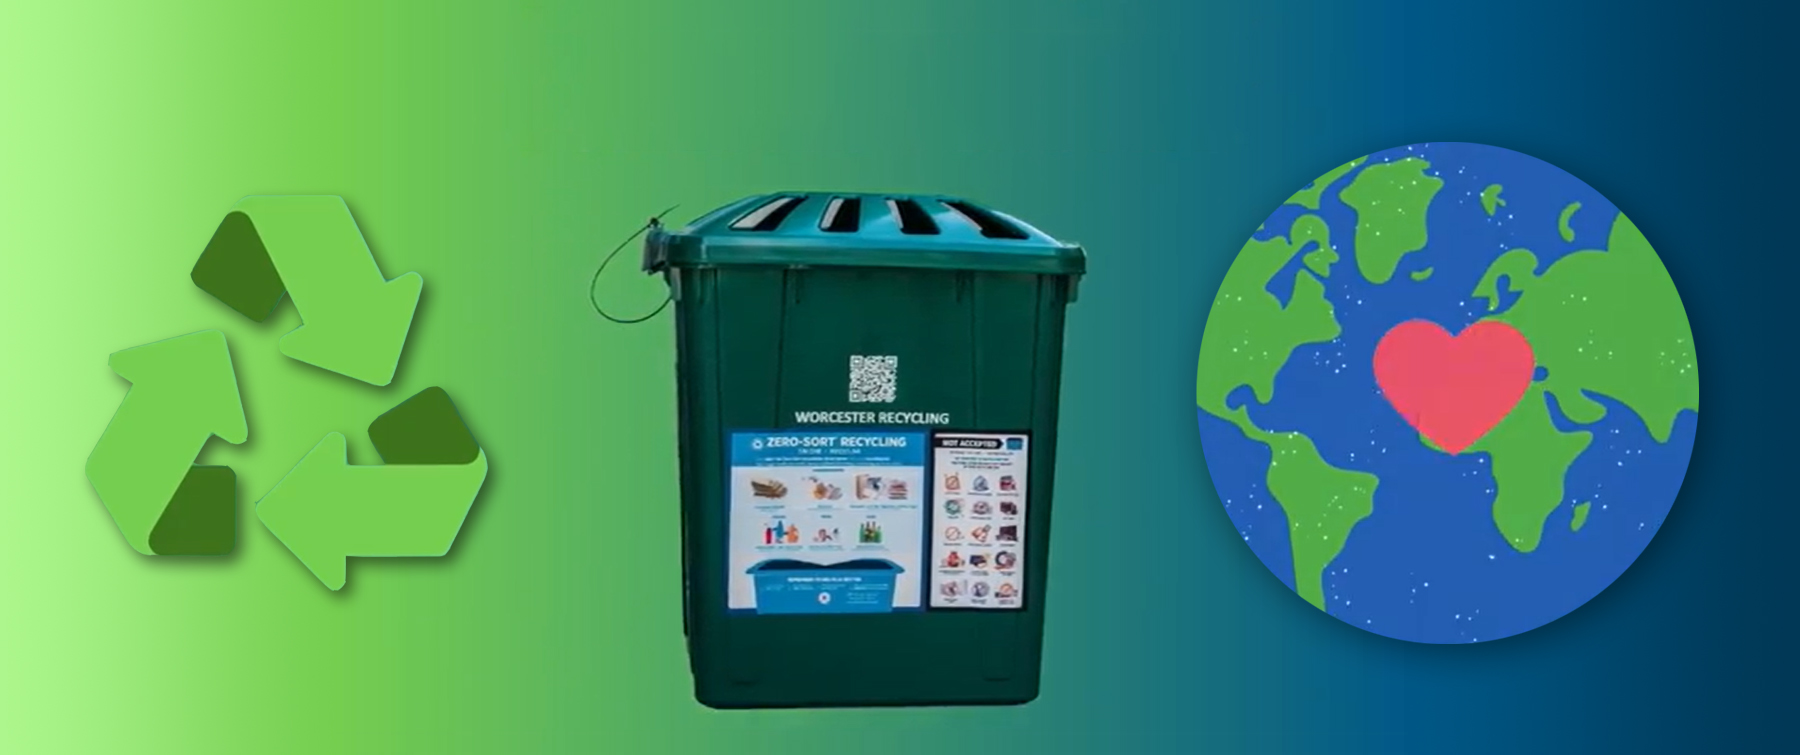 Green Recycling Arrows, Worcester Recycling Bin and Earth with Heart Graphic